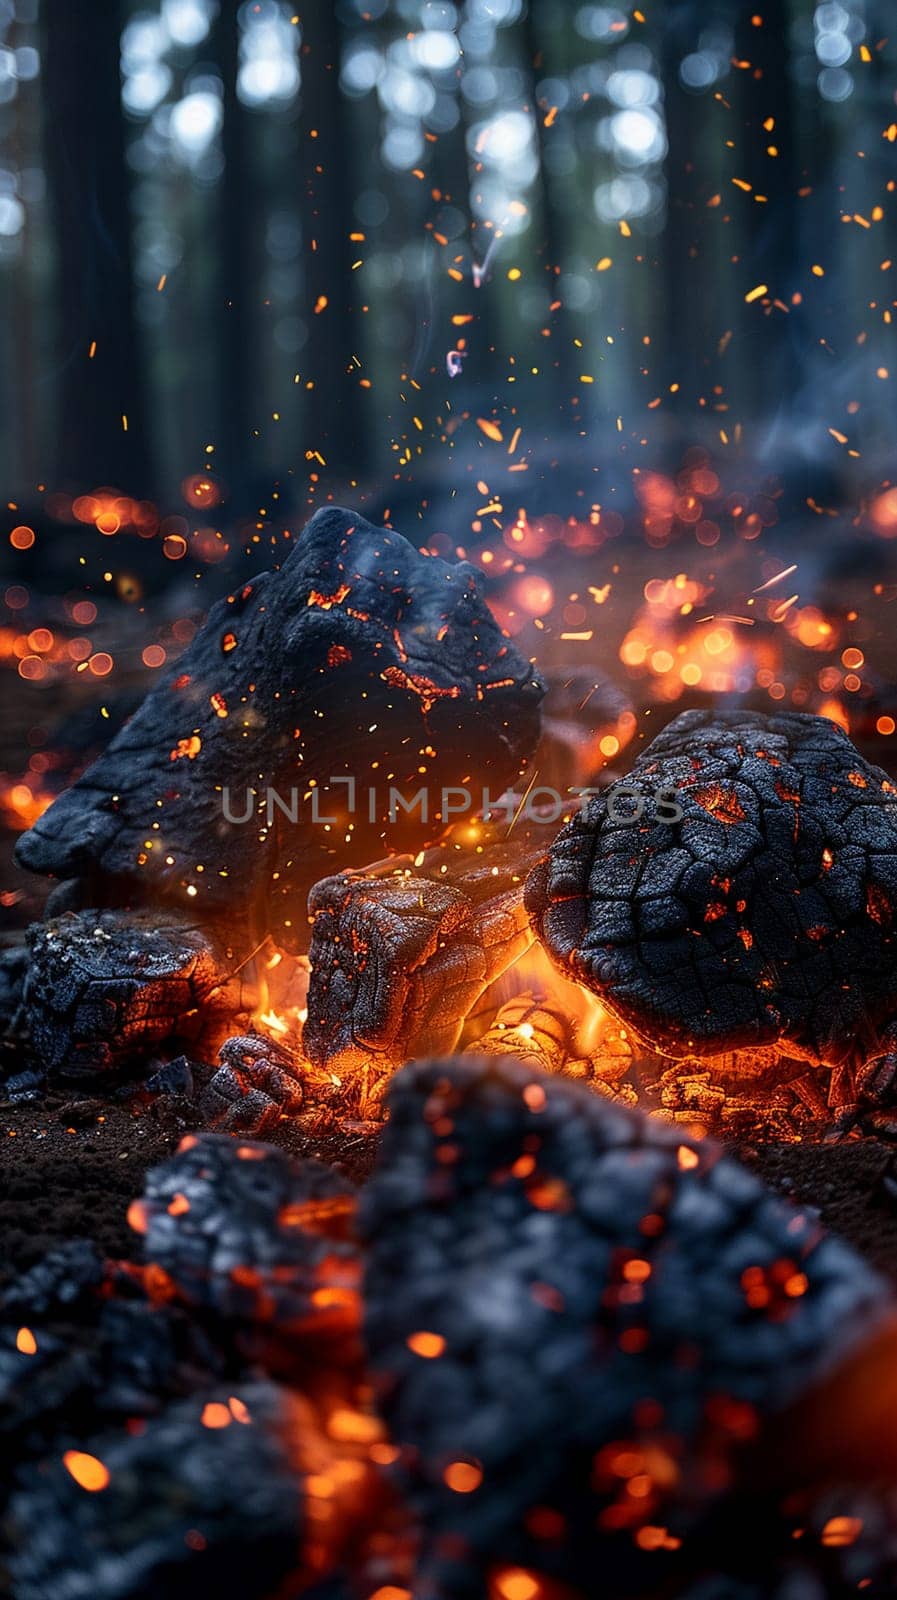 Glowing embers in a campfire, capturing warmth and adventure themes.